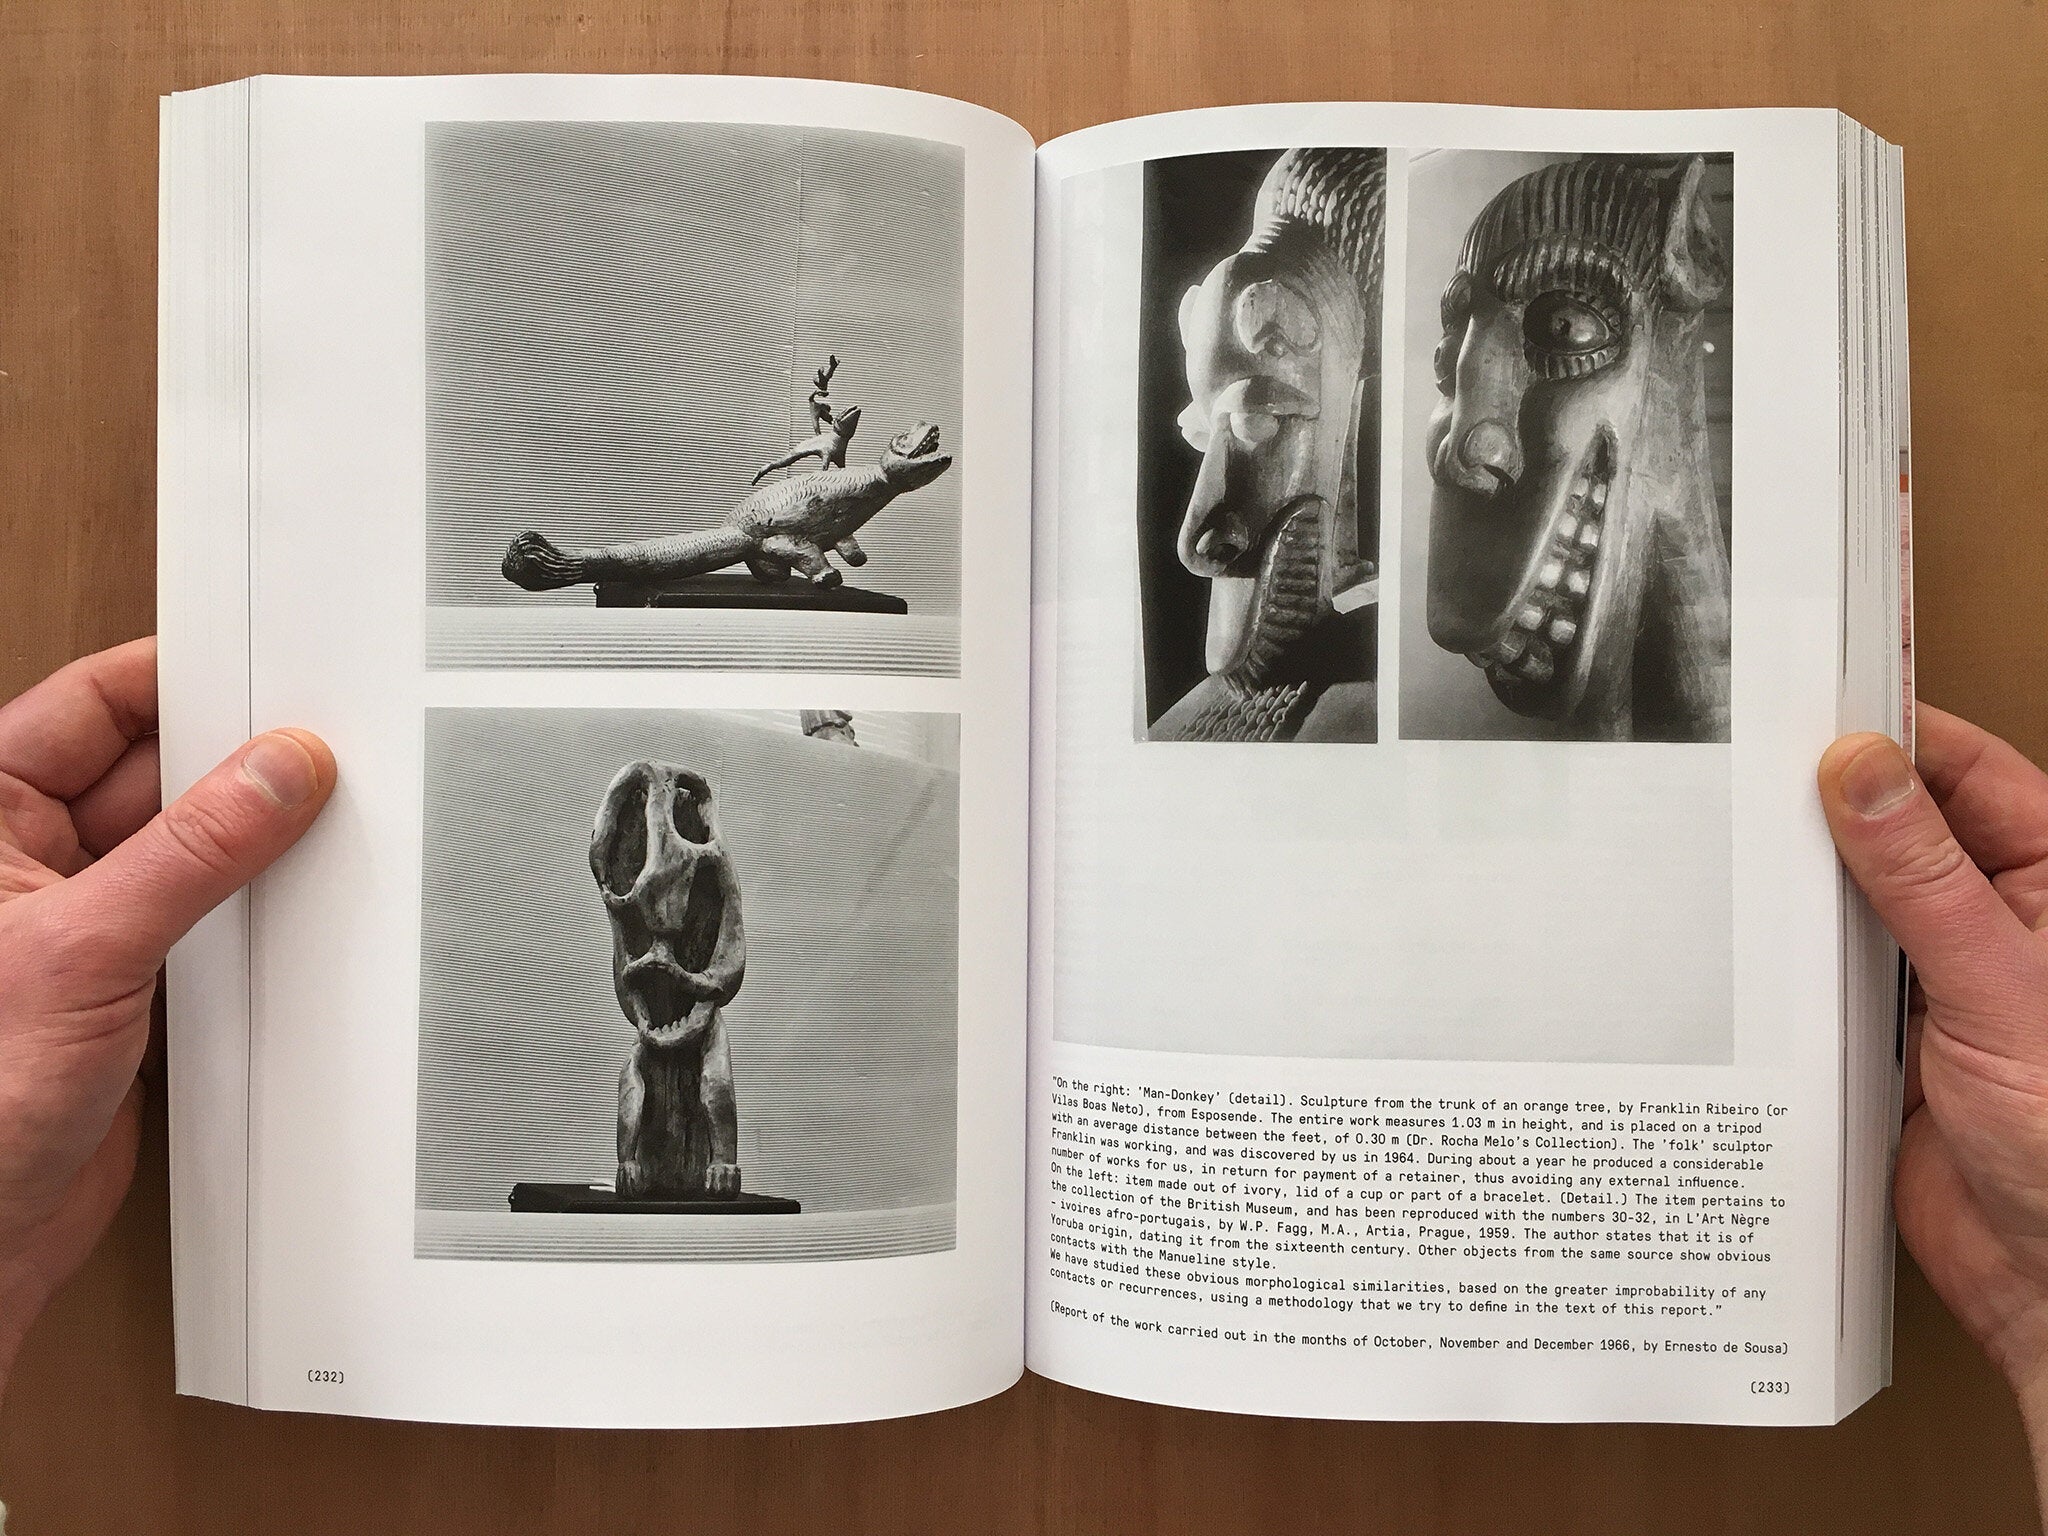 OEI #80–81: THE ZERO ALTERNATIVE: ERNESTO DE SOUSA AND SOME OTHER AESTHETIC OPERATORS IN PORTUGUESE ART AND POETRY FROM THE 1960S ONWARDS edited by Jonas (J) Magnusson and Cecilia Grönberg